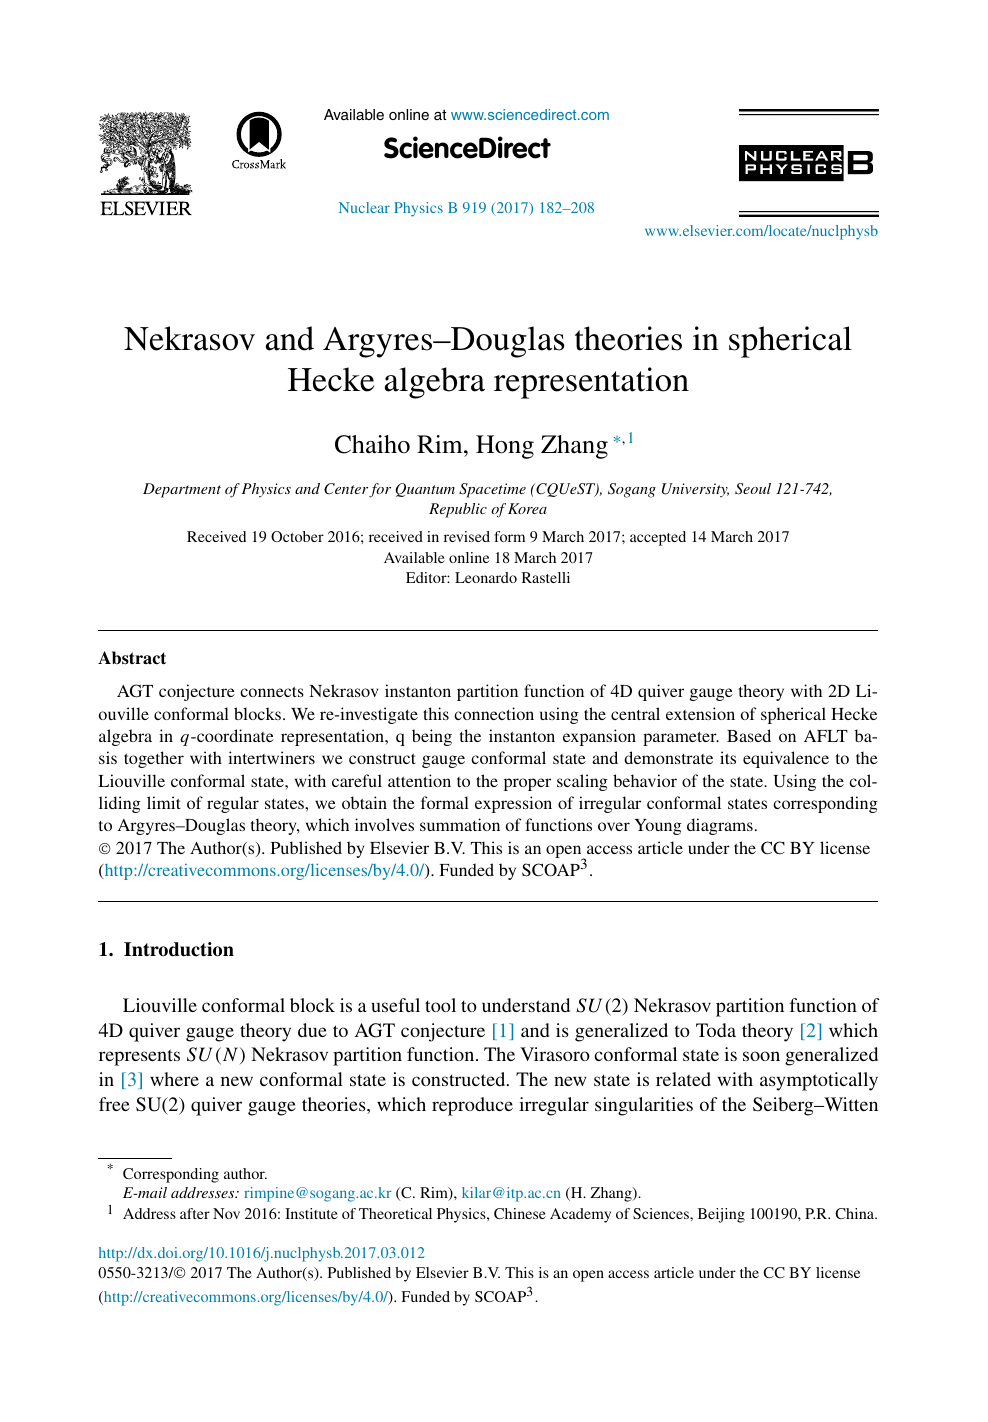 Nekrasov And Argyres Douglas Theories In Spherical Hecke Algebra Representation Topic Of Research Paper In Physical Sciences Download Scholarly Article Pdf And Read For Free On Cyberleninka Open Science Hub